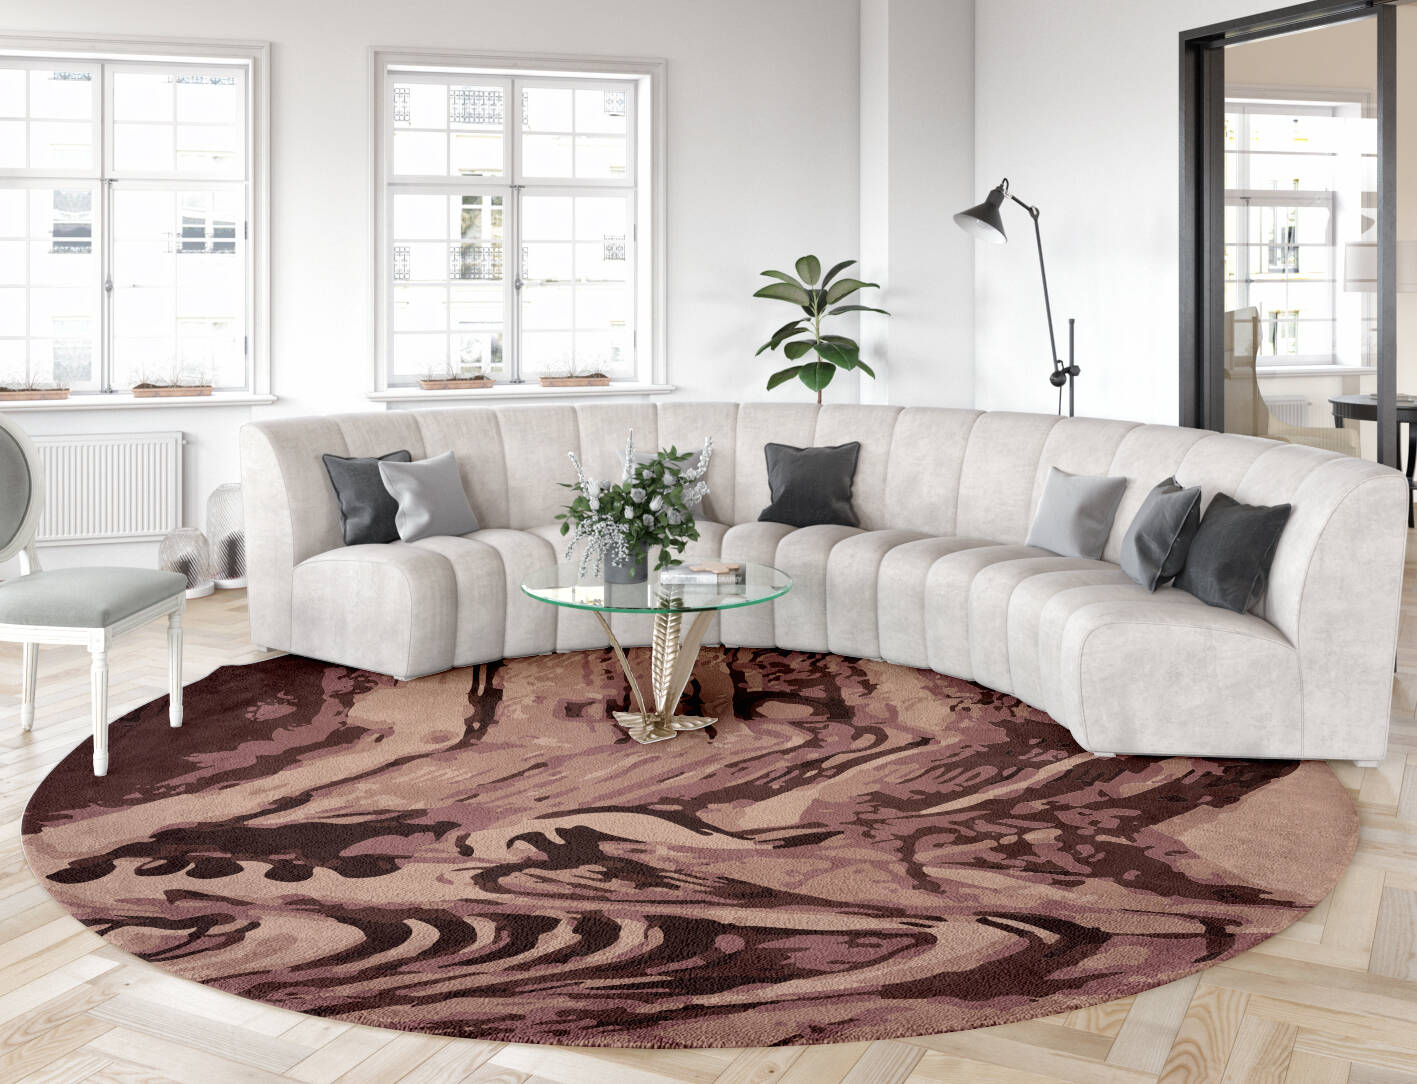 Refraction Surface Art Round Hand Tufted Pure Wool Custom Rug by Rug Artisan